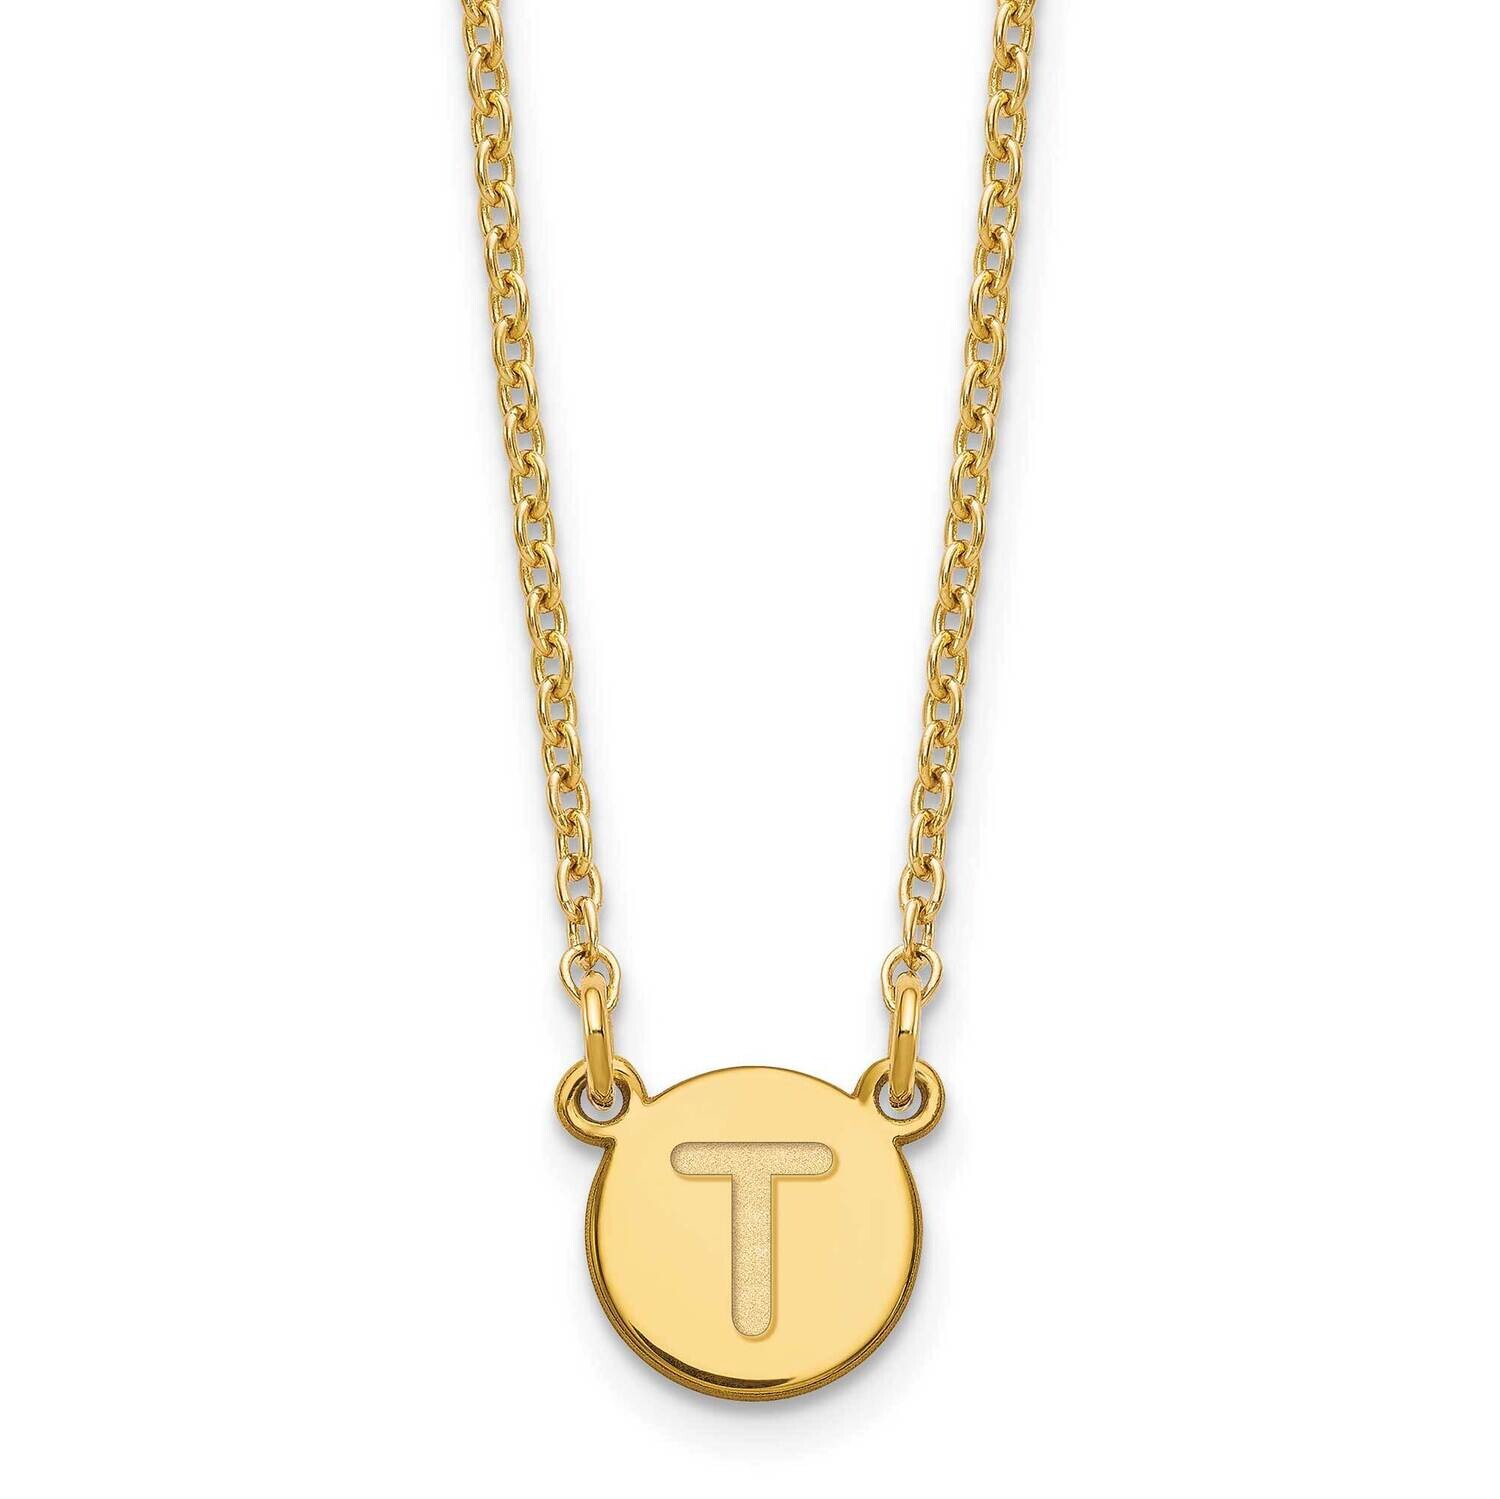 Gold-Plated Tiny Circle Block Letter T Initial Necklace Sterling Silver XNA722GP/T